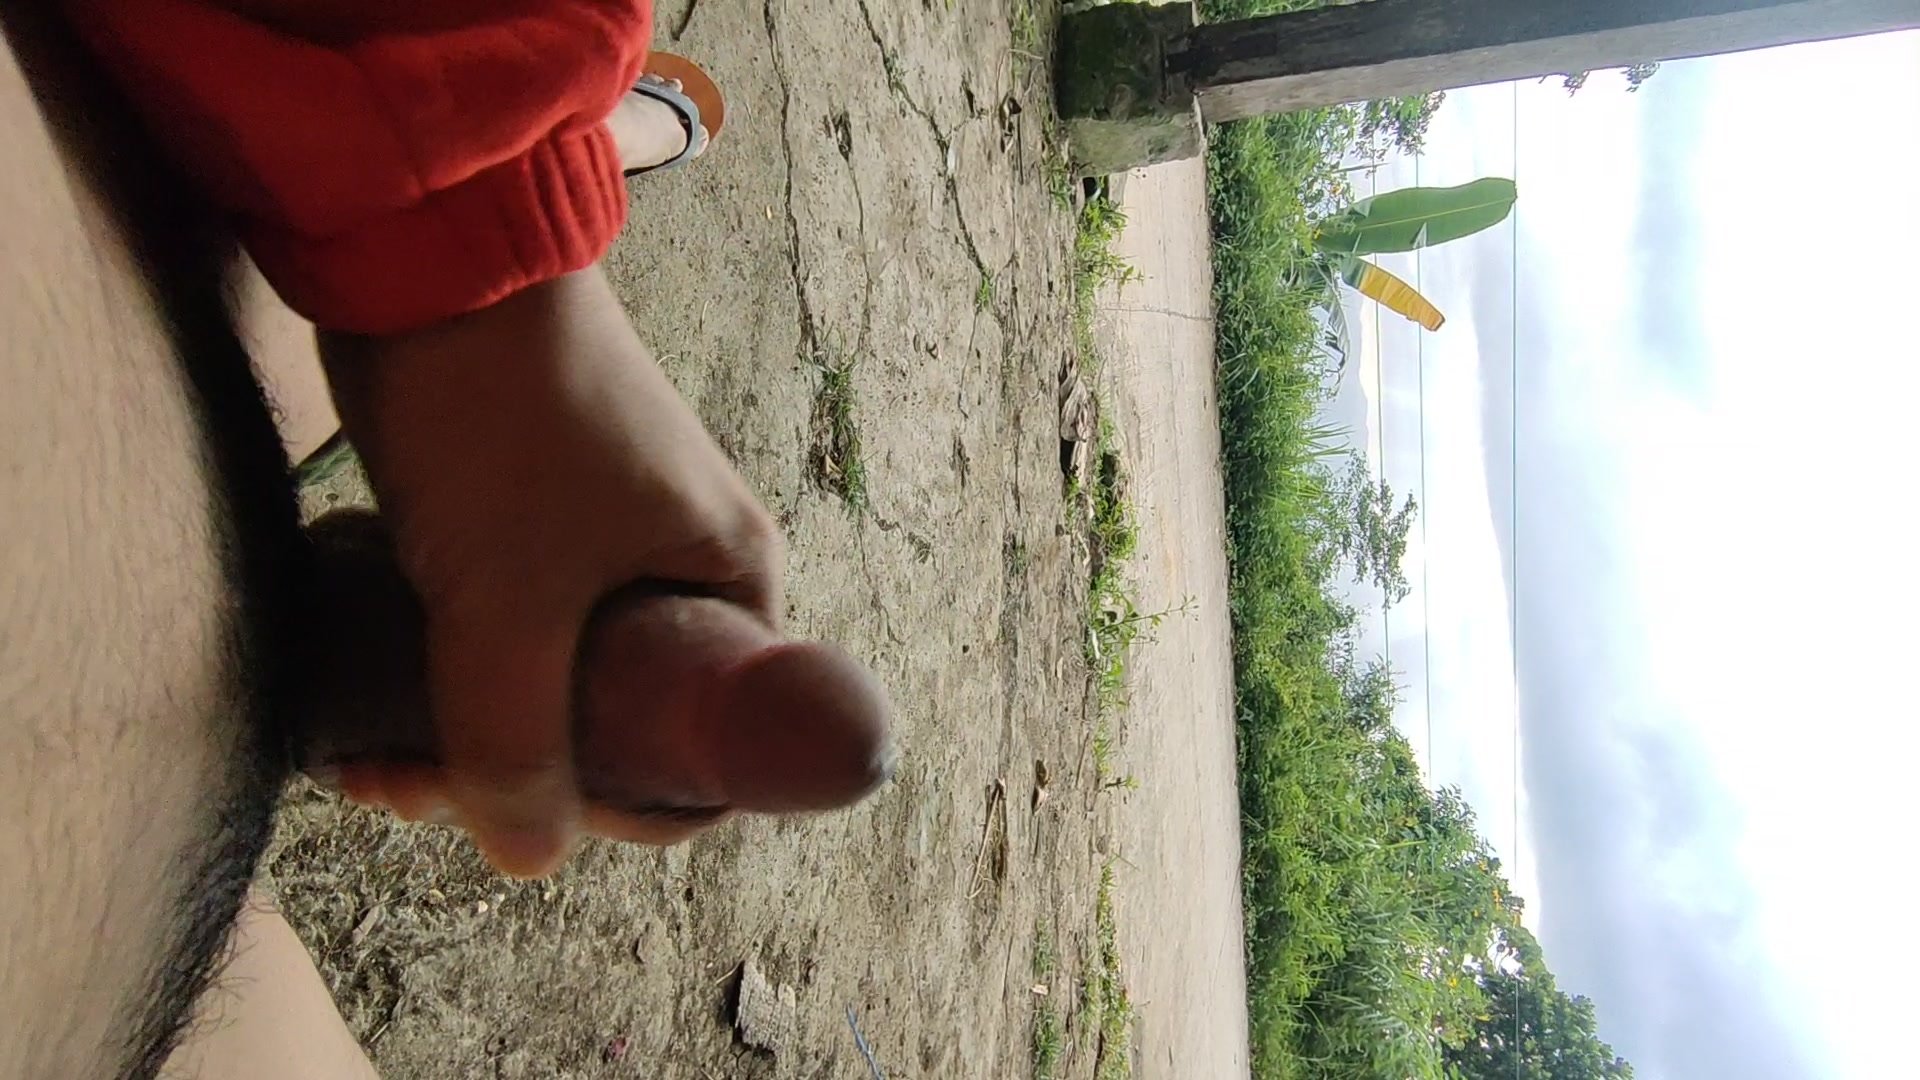 Masturbating in public with my cock ring pic picture